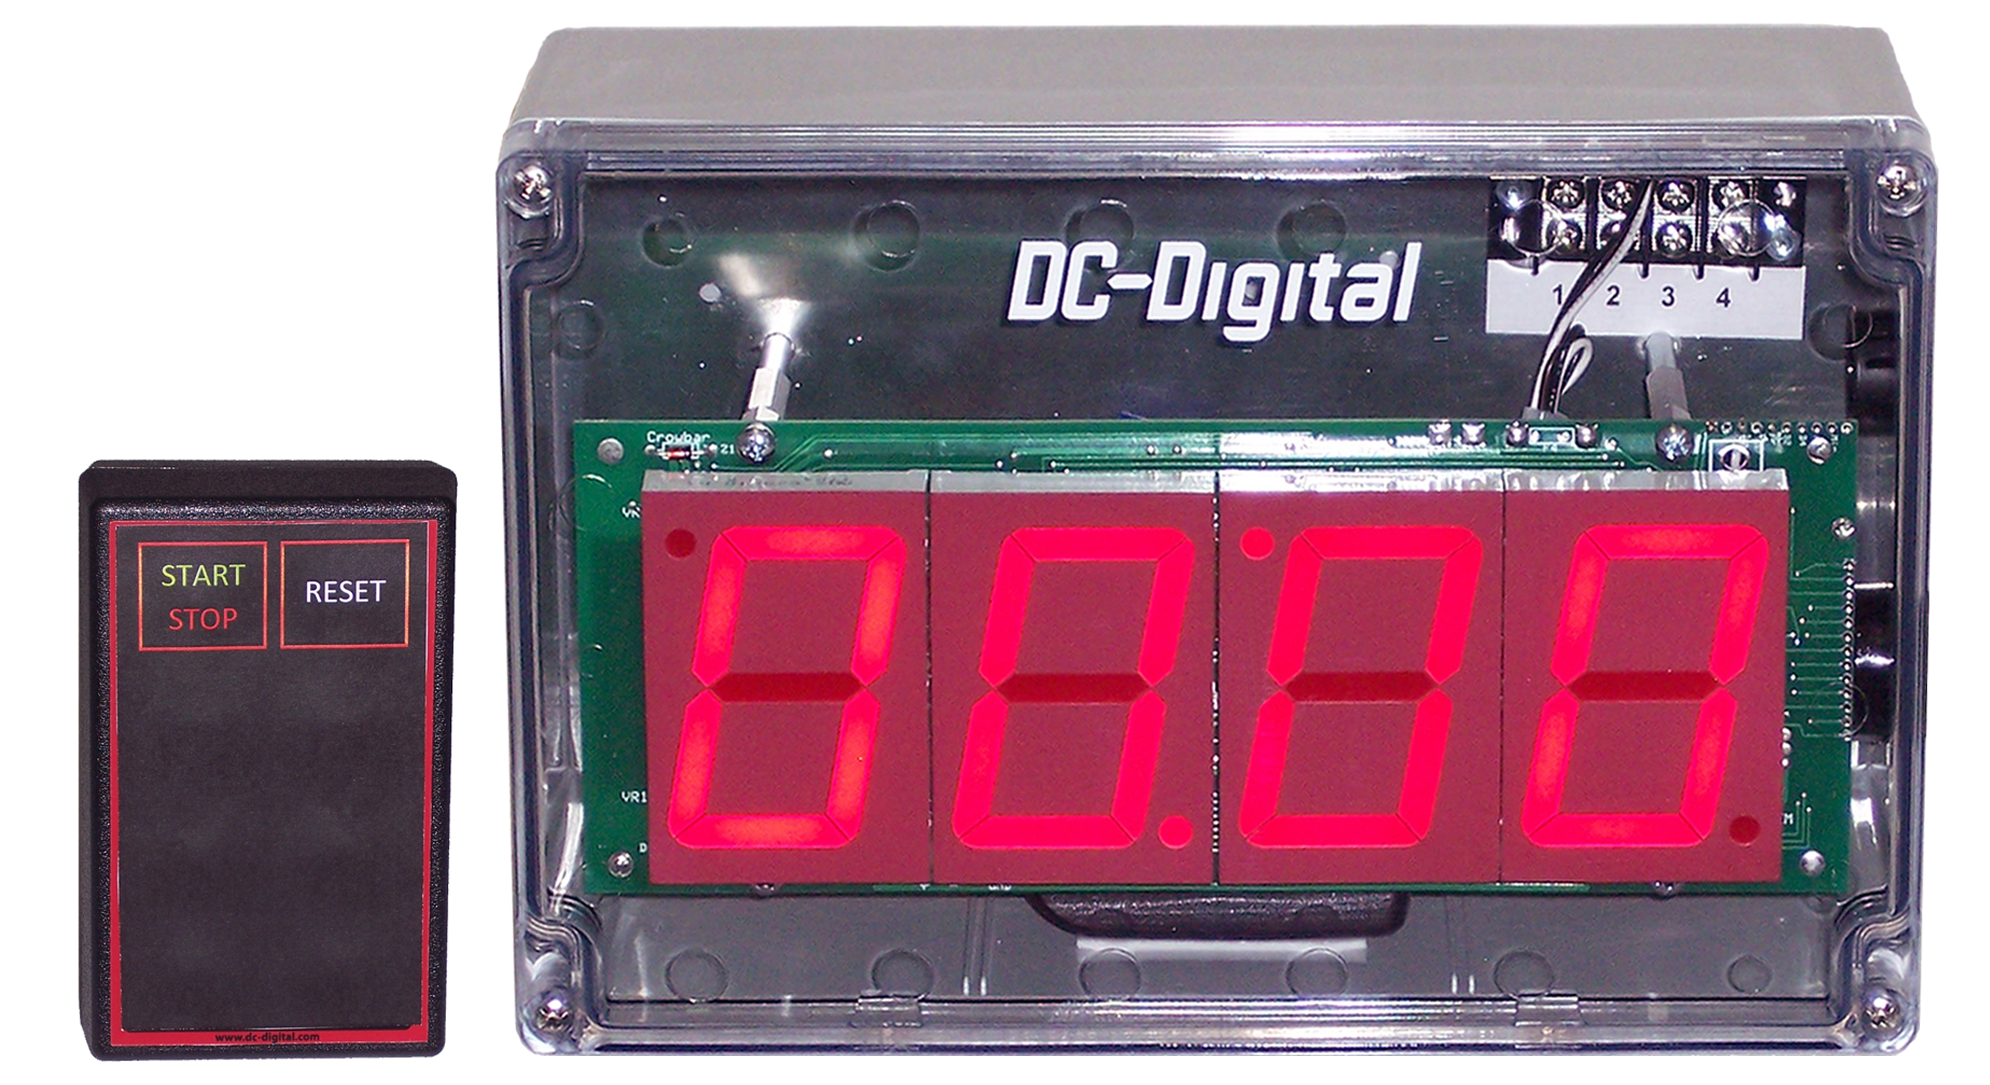 2.3 Inch LED Digital Nema 4X enclosed count up timer with wireless handheld controller